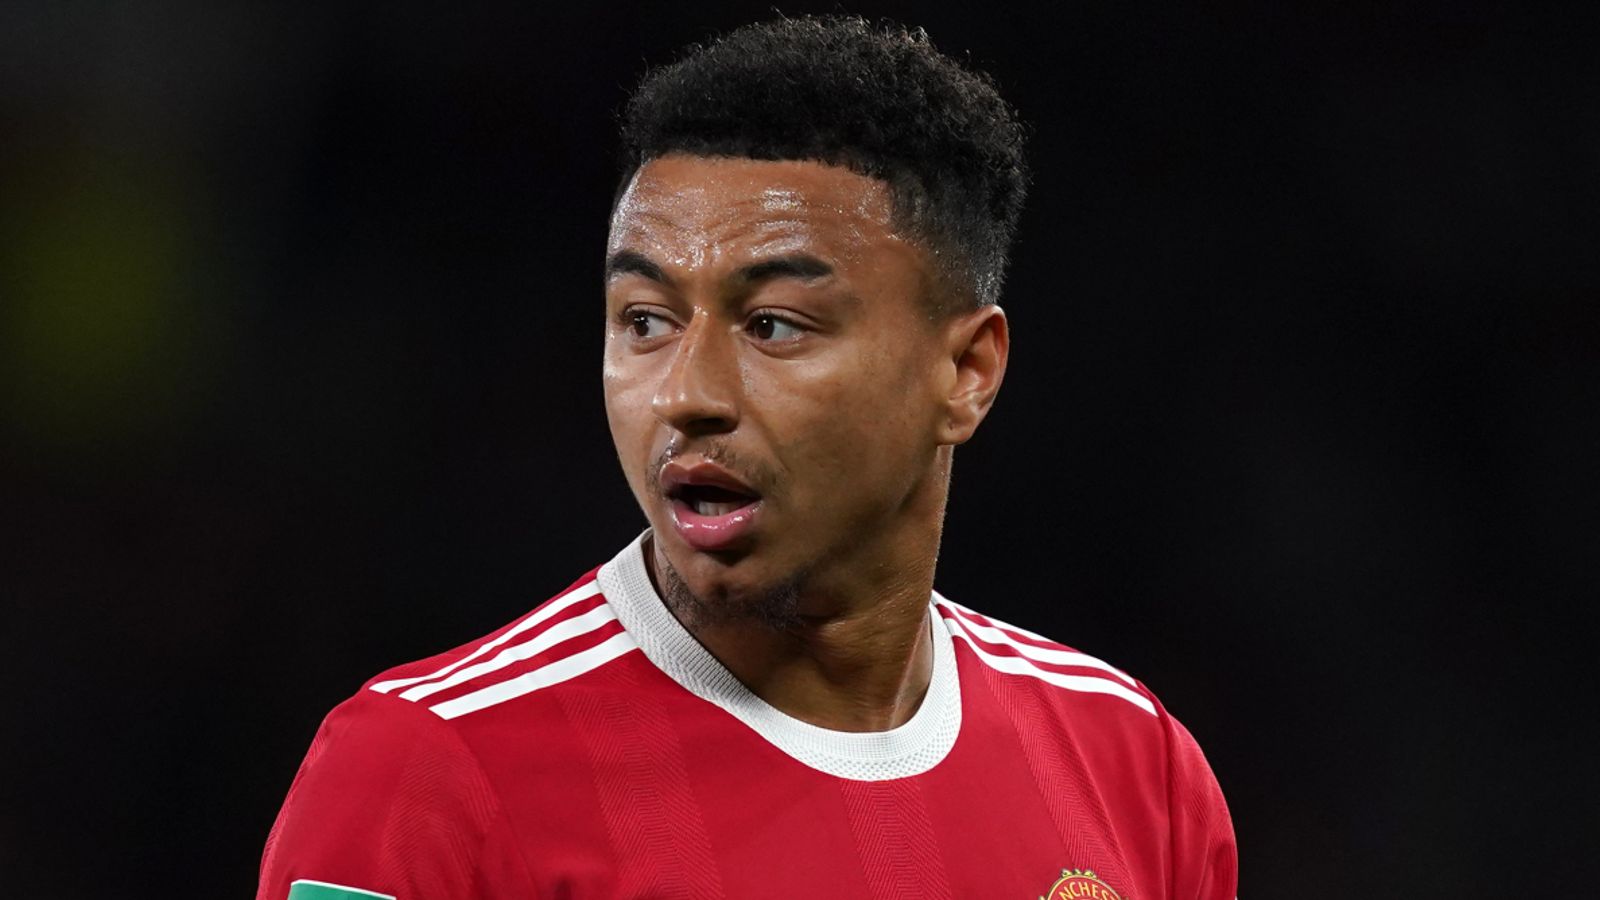 Jesse Lingard: West Ham boss David Moyes 'disappointed' by forward's lack of game time at Man Utd